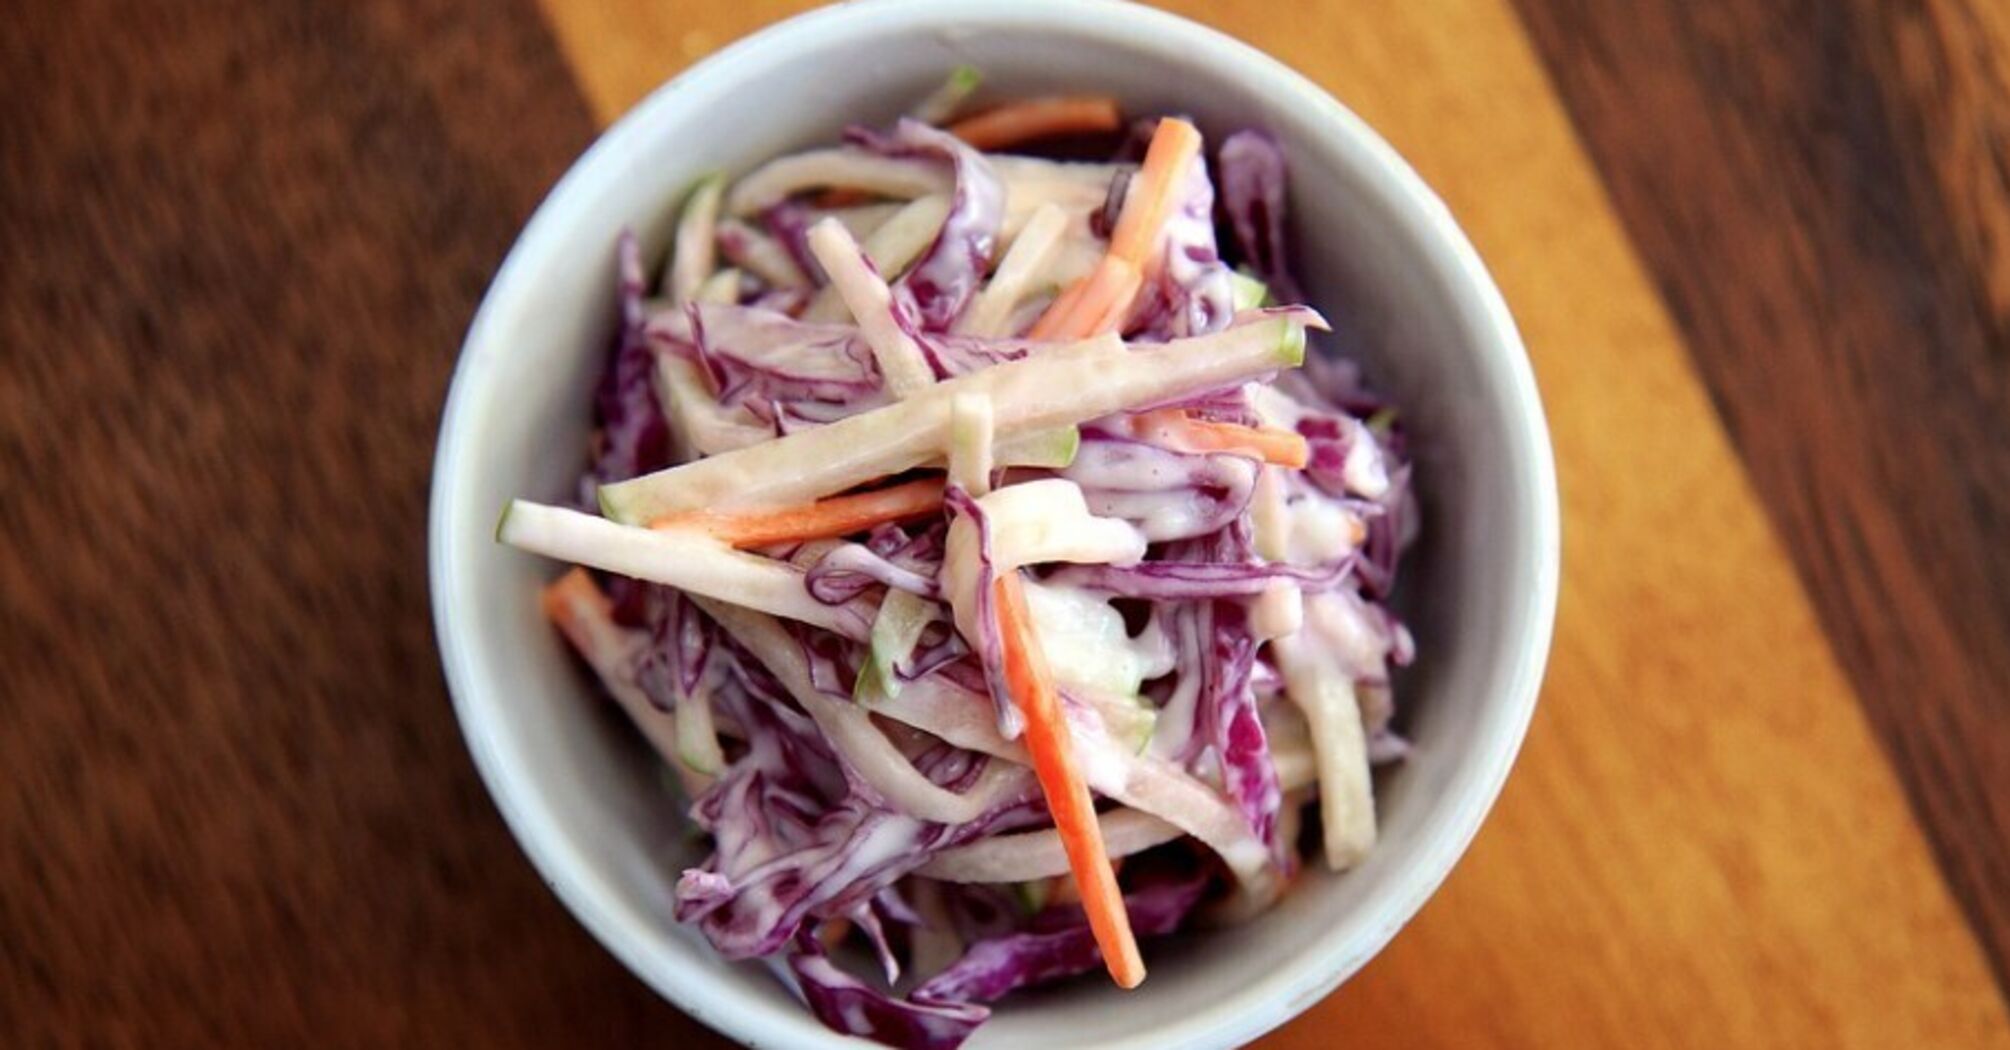 Salad recipe with white cabbage and red cabbage.